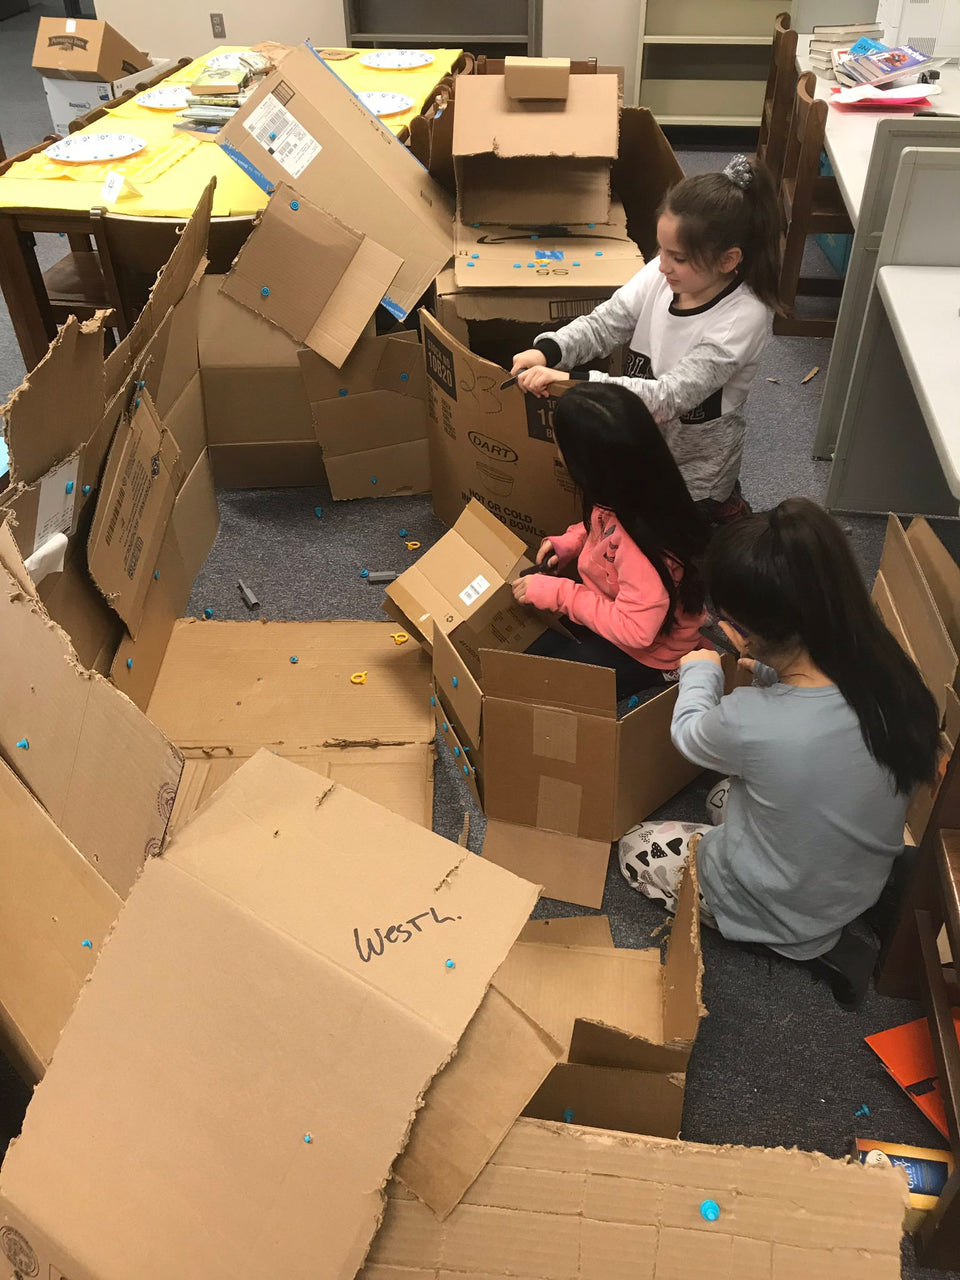 Construction in progress with Makedo cardboard tools